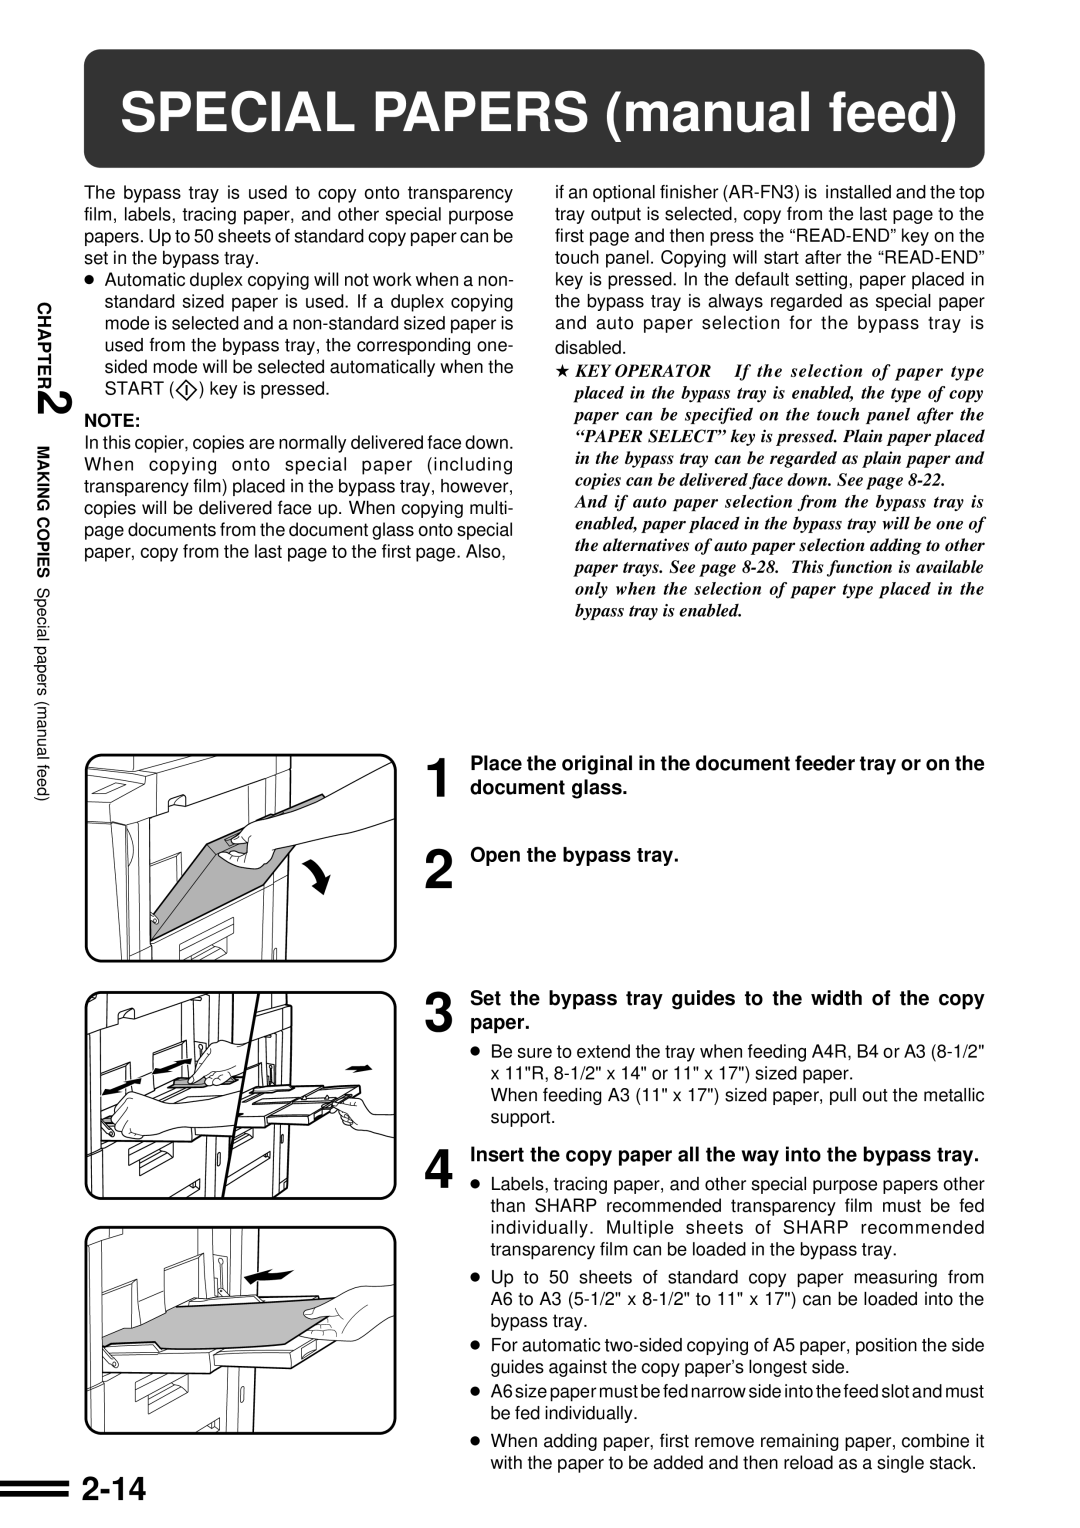 Sharp AR-507 operation manual SPECIAL PAPERS manual feed, 2-14, Place the original in the document feeder tray or on the 